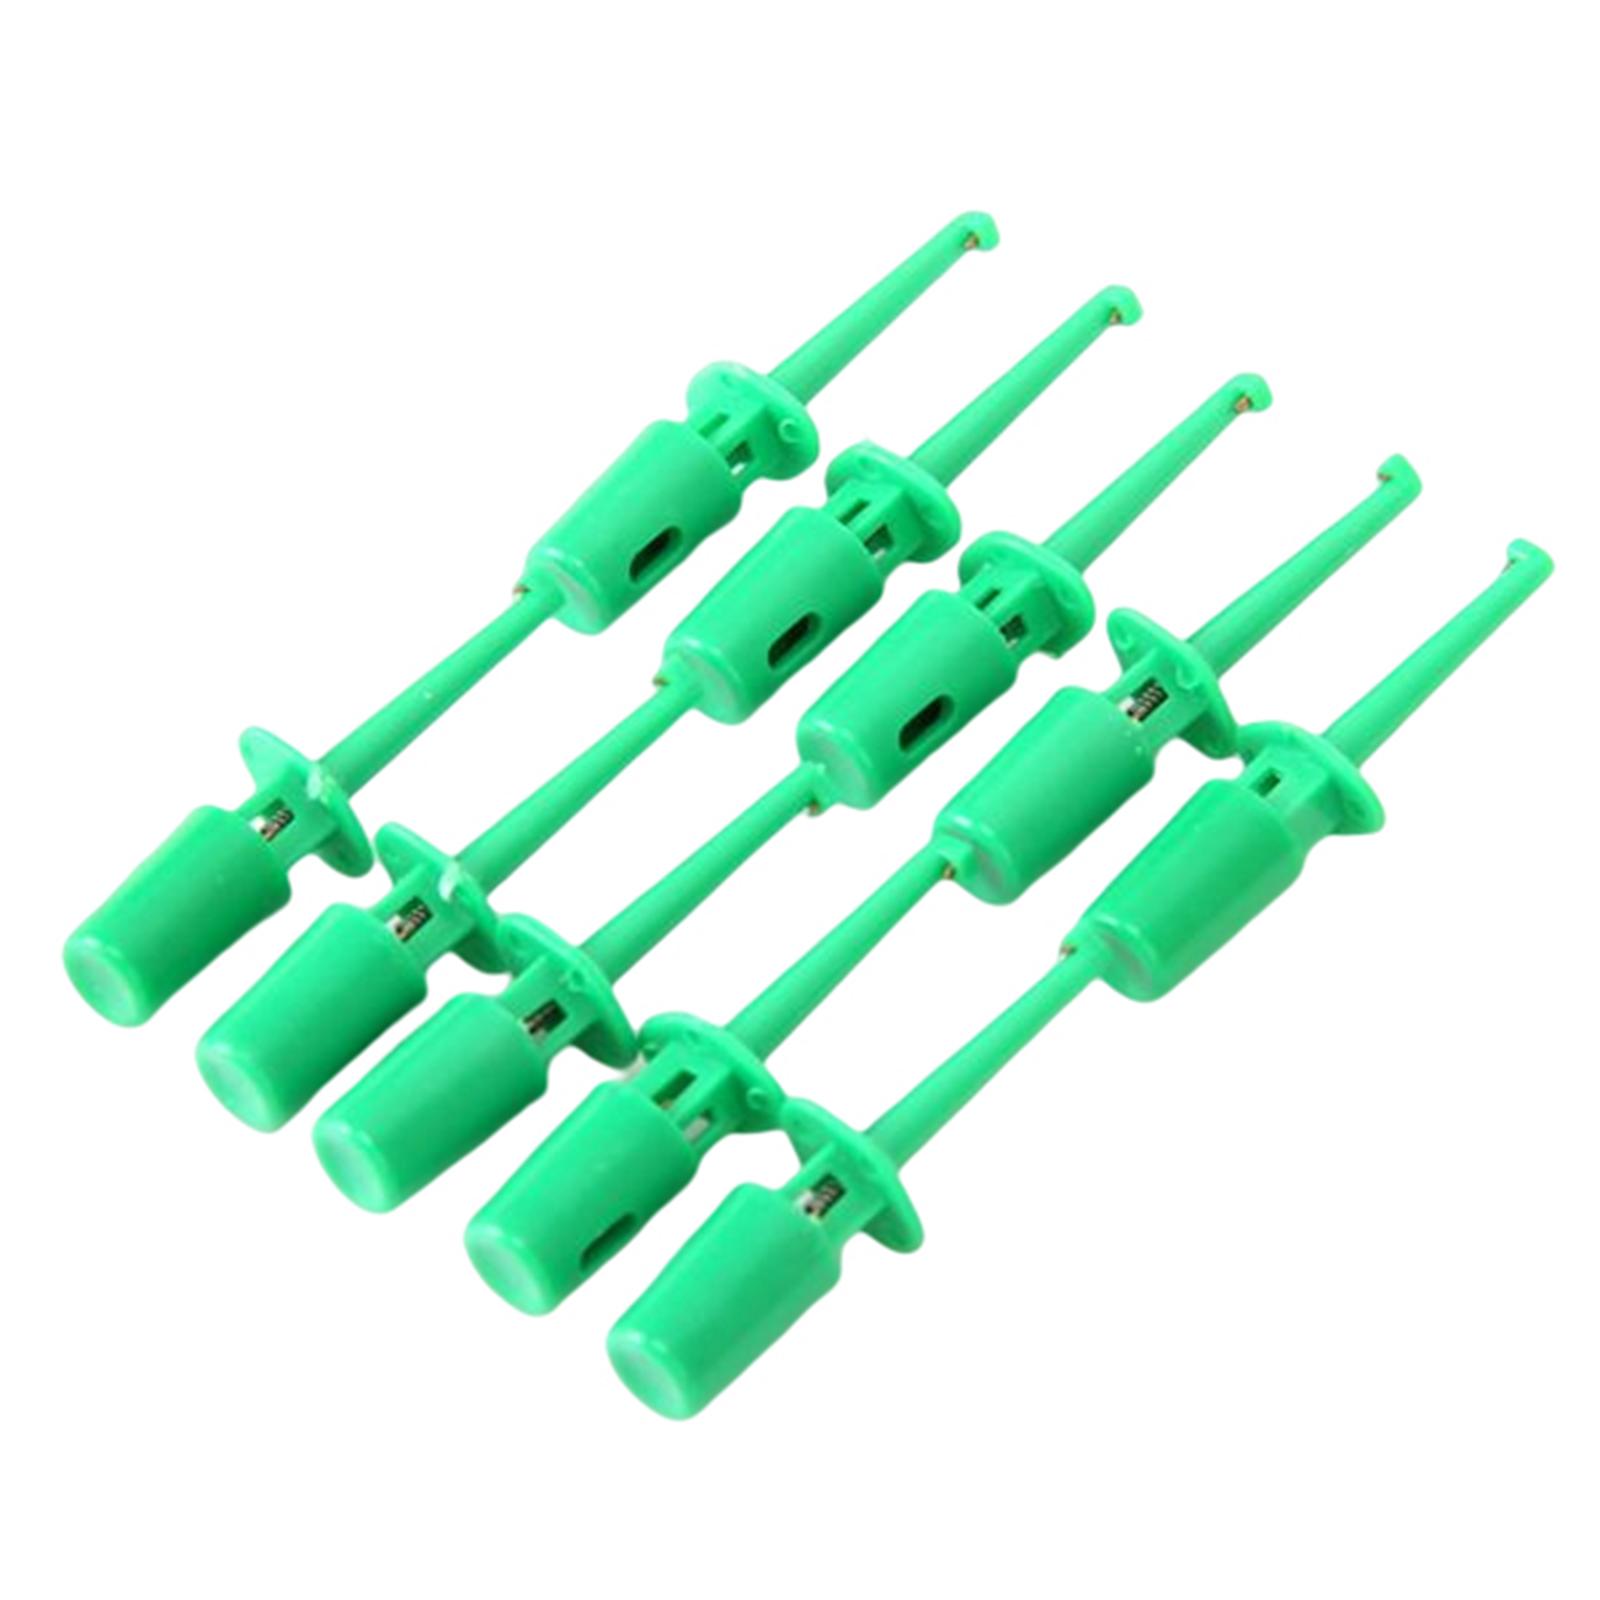 10 x Mini Test Hook Probe Spring Clip for PCB SMD IC Green